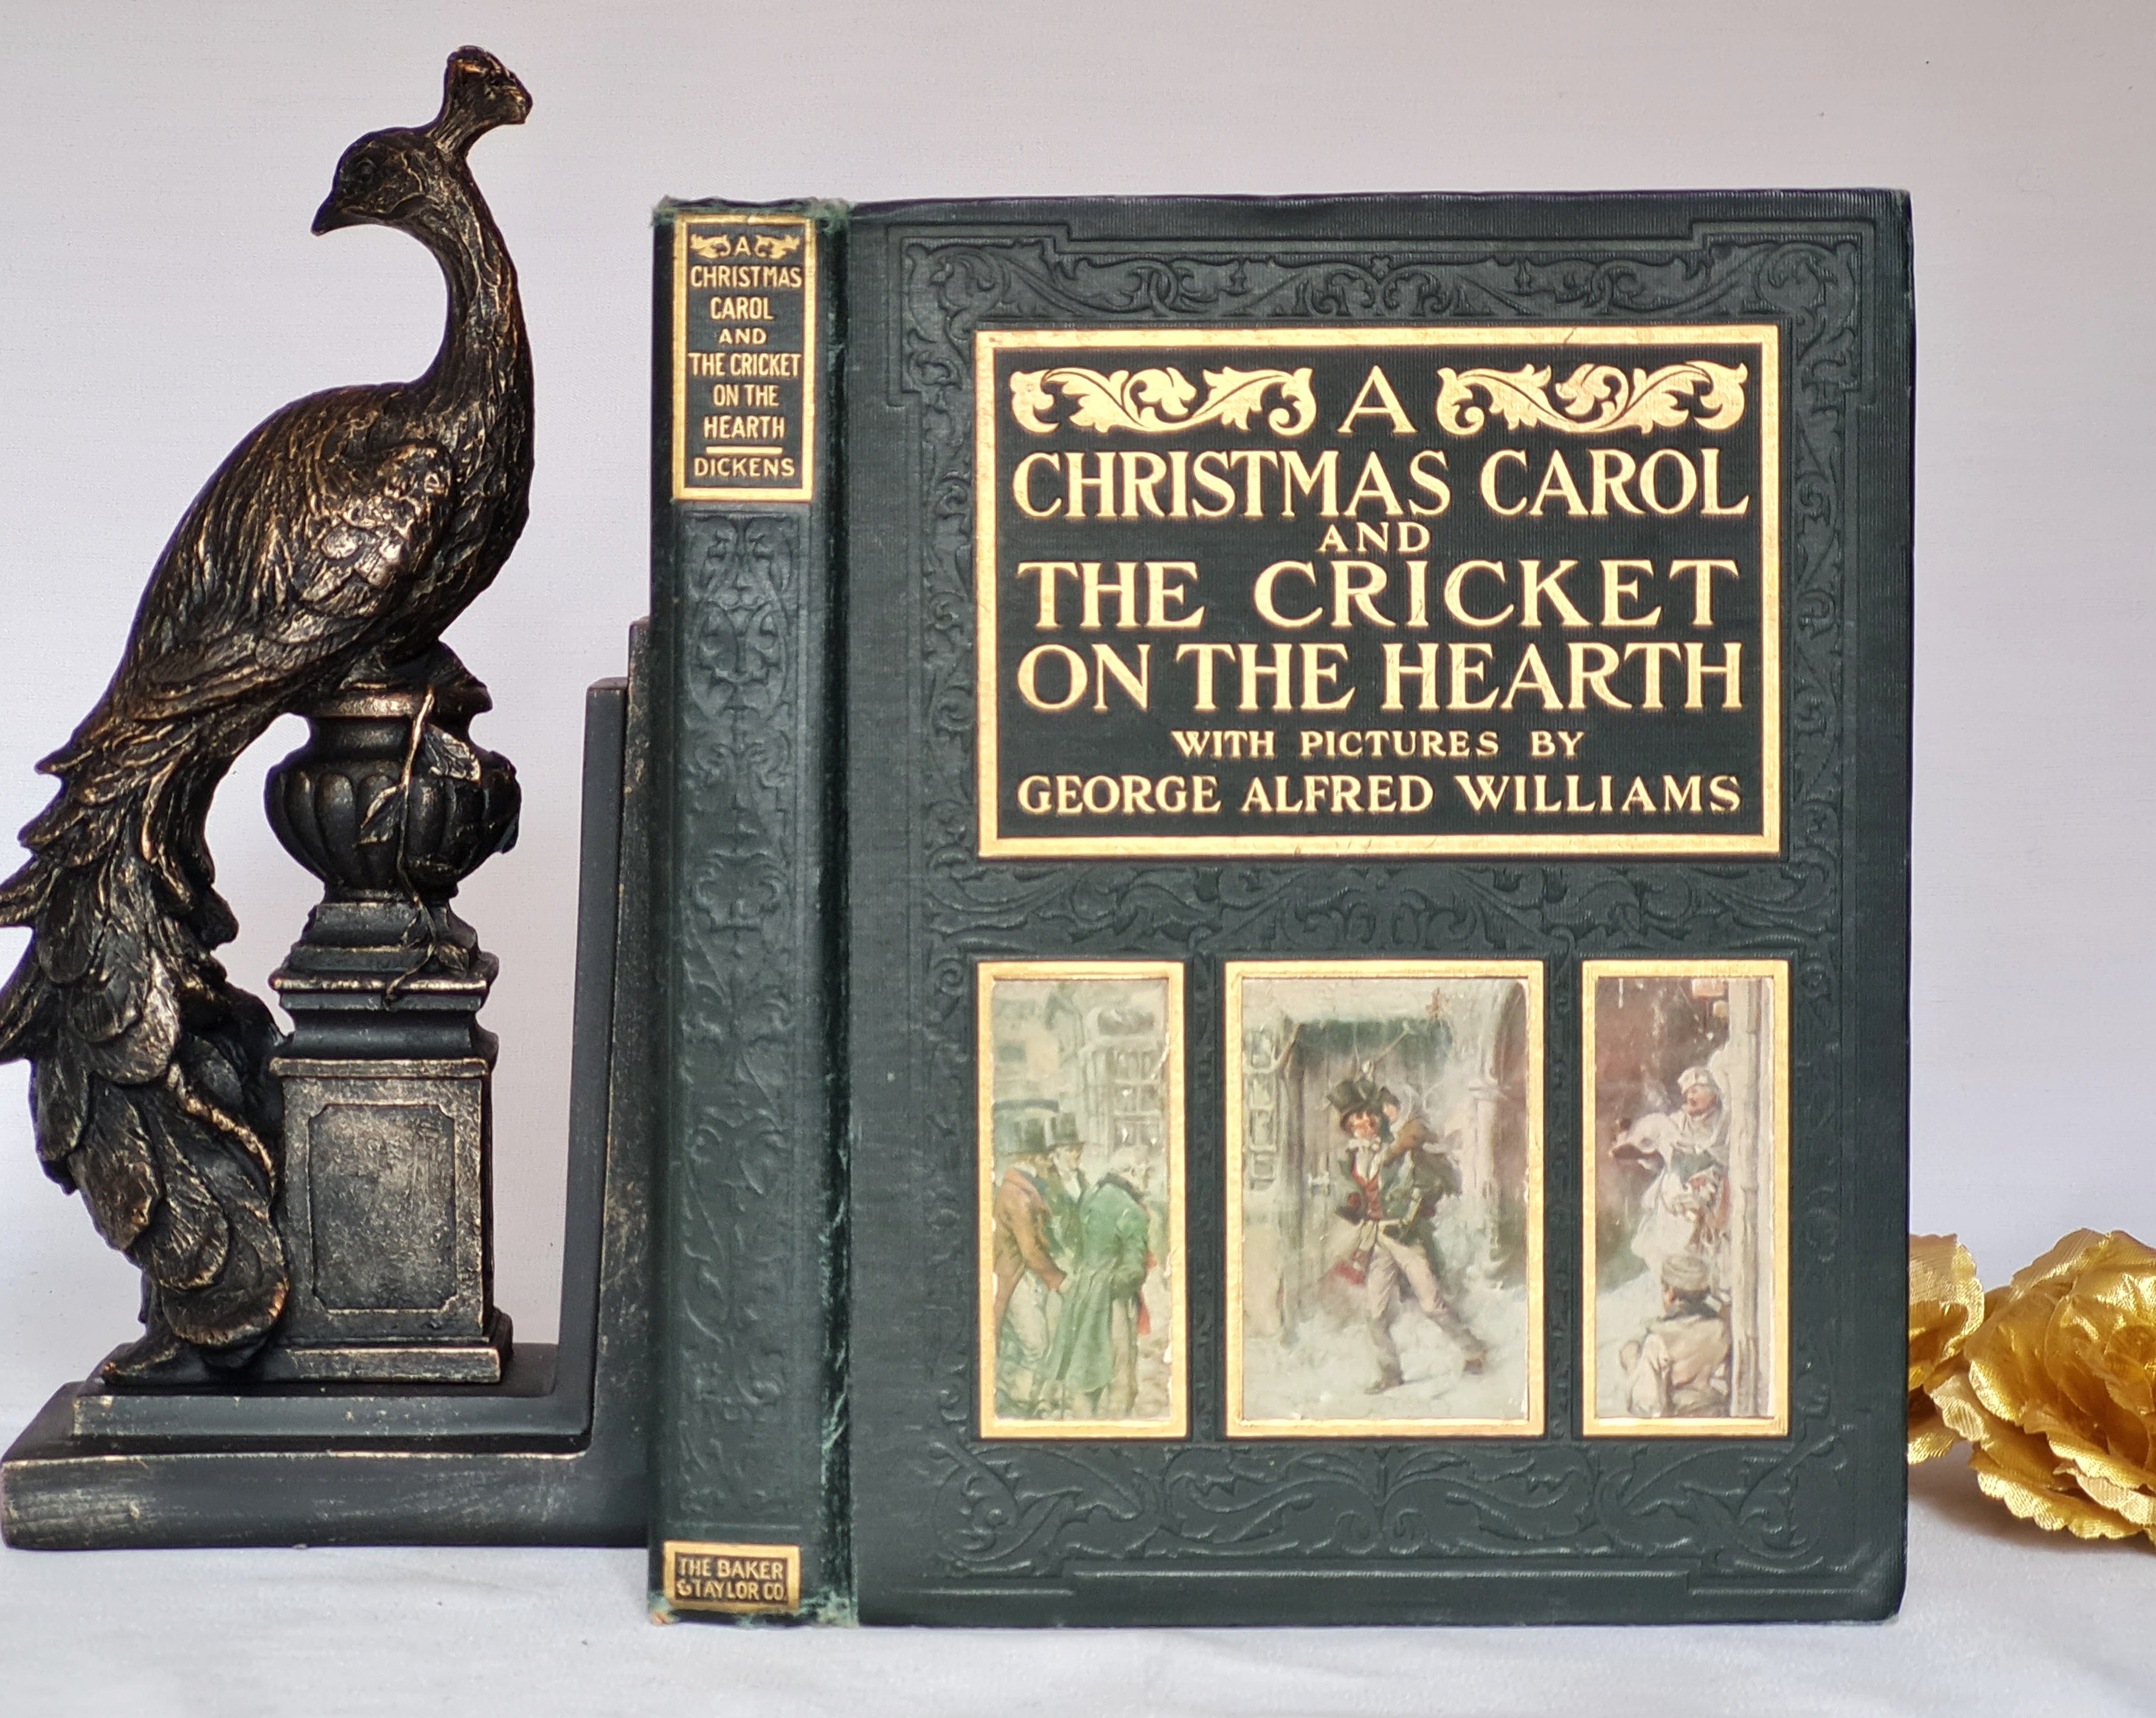 a christmas carol and the cricket on the hearth